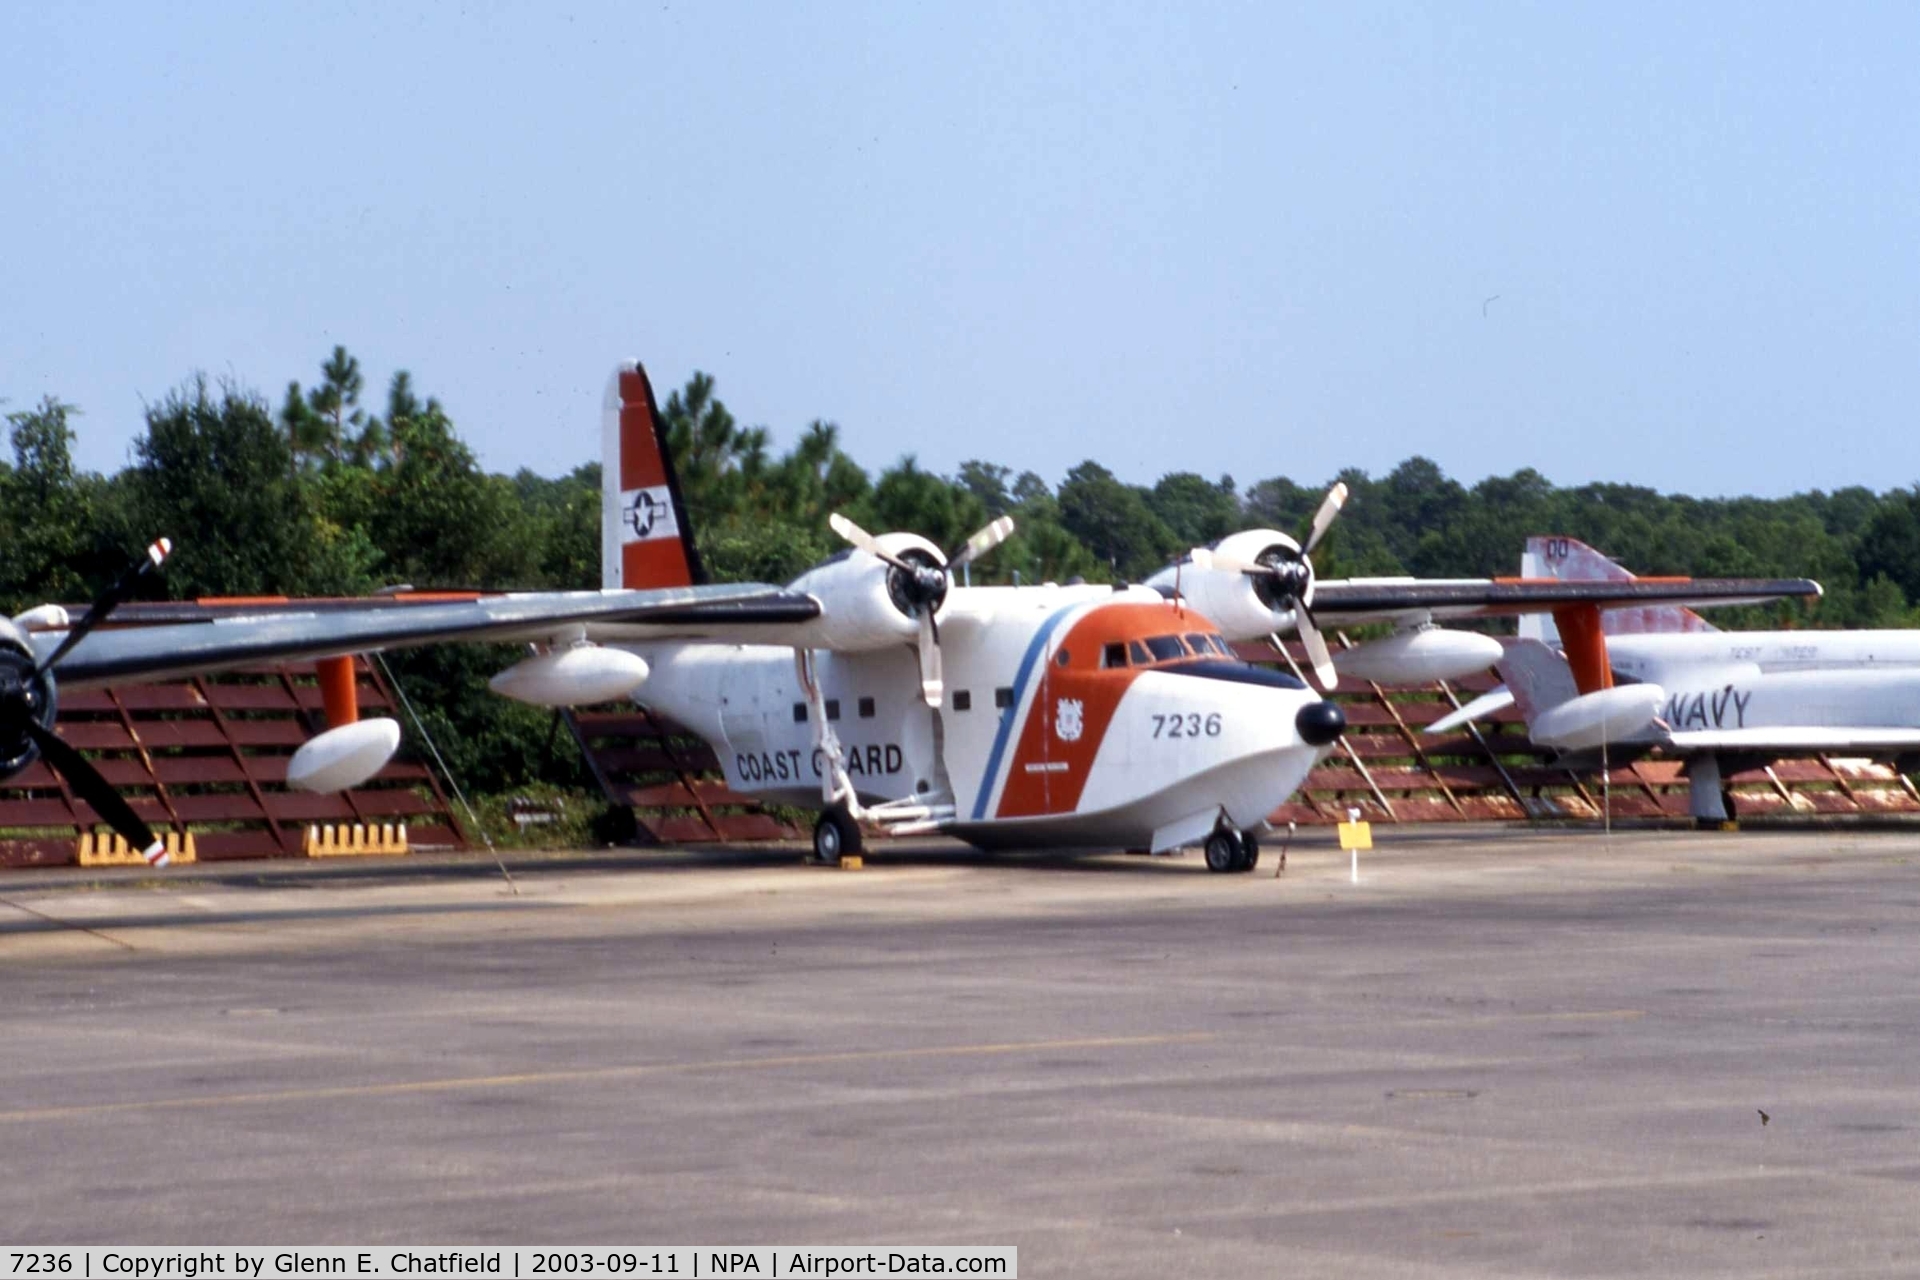 7236, Grumman UF-1G (HU-16B) Albatross C/N G-322, HU-16E at the National Museum of Naval Aviation